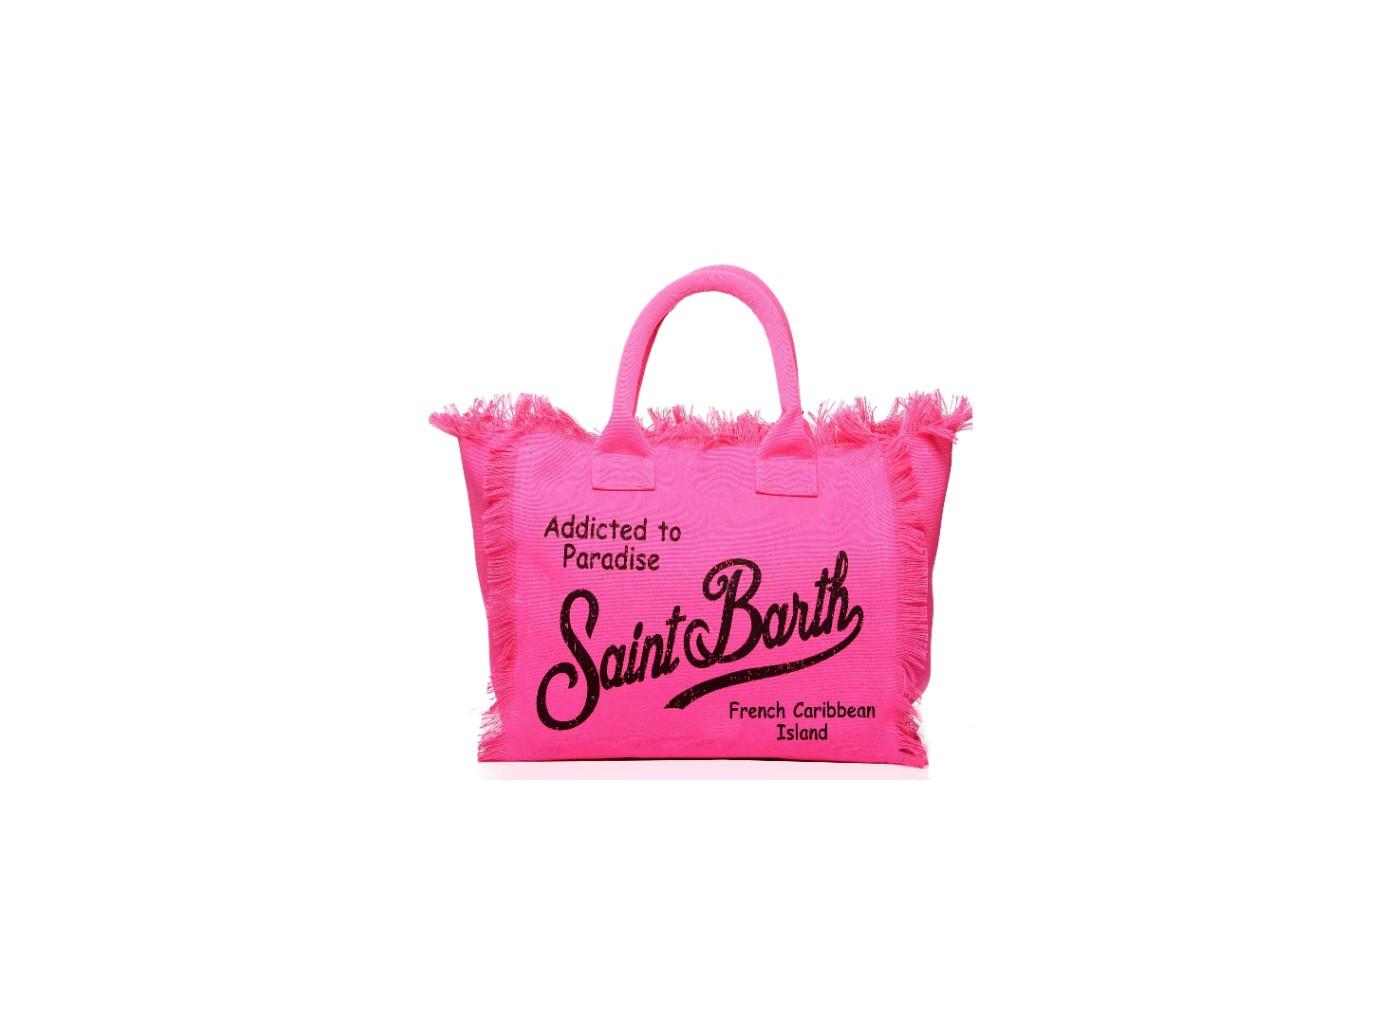 Shop 5 Pink Totes Inspired By Chrishell Stause's Prada Bag